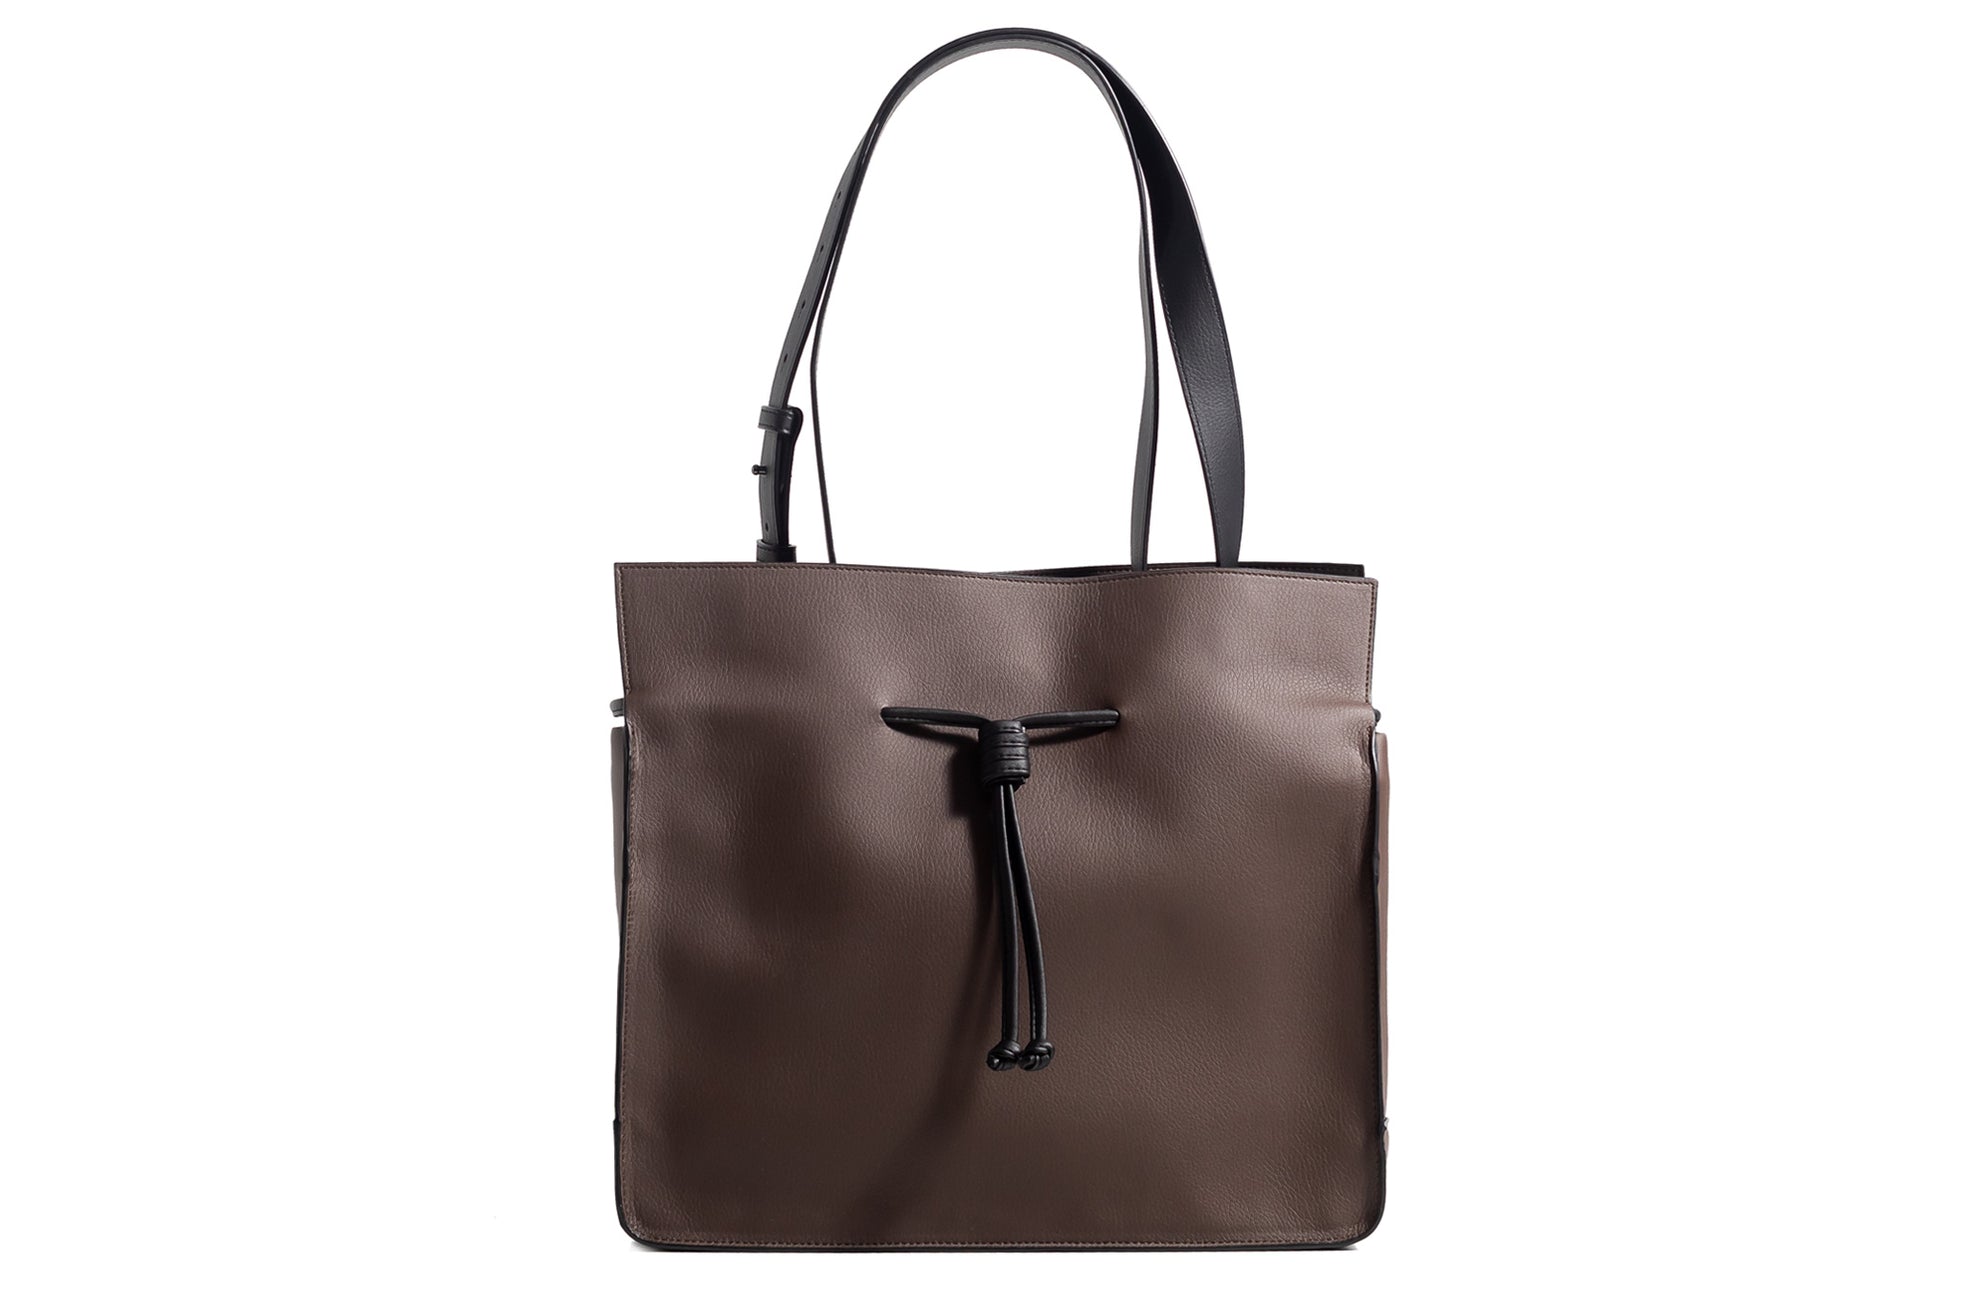 The Medium Shopper in Technik in Taupe and Black image 1